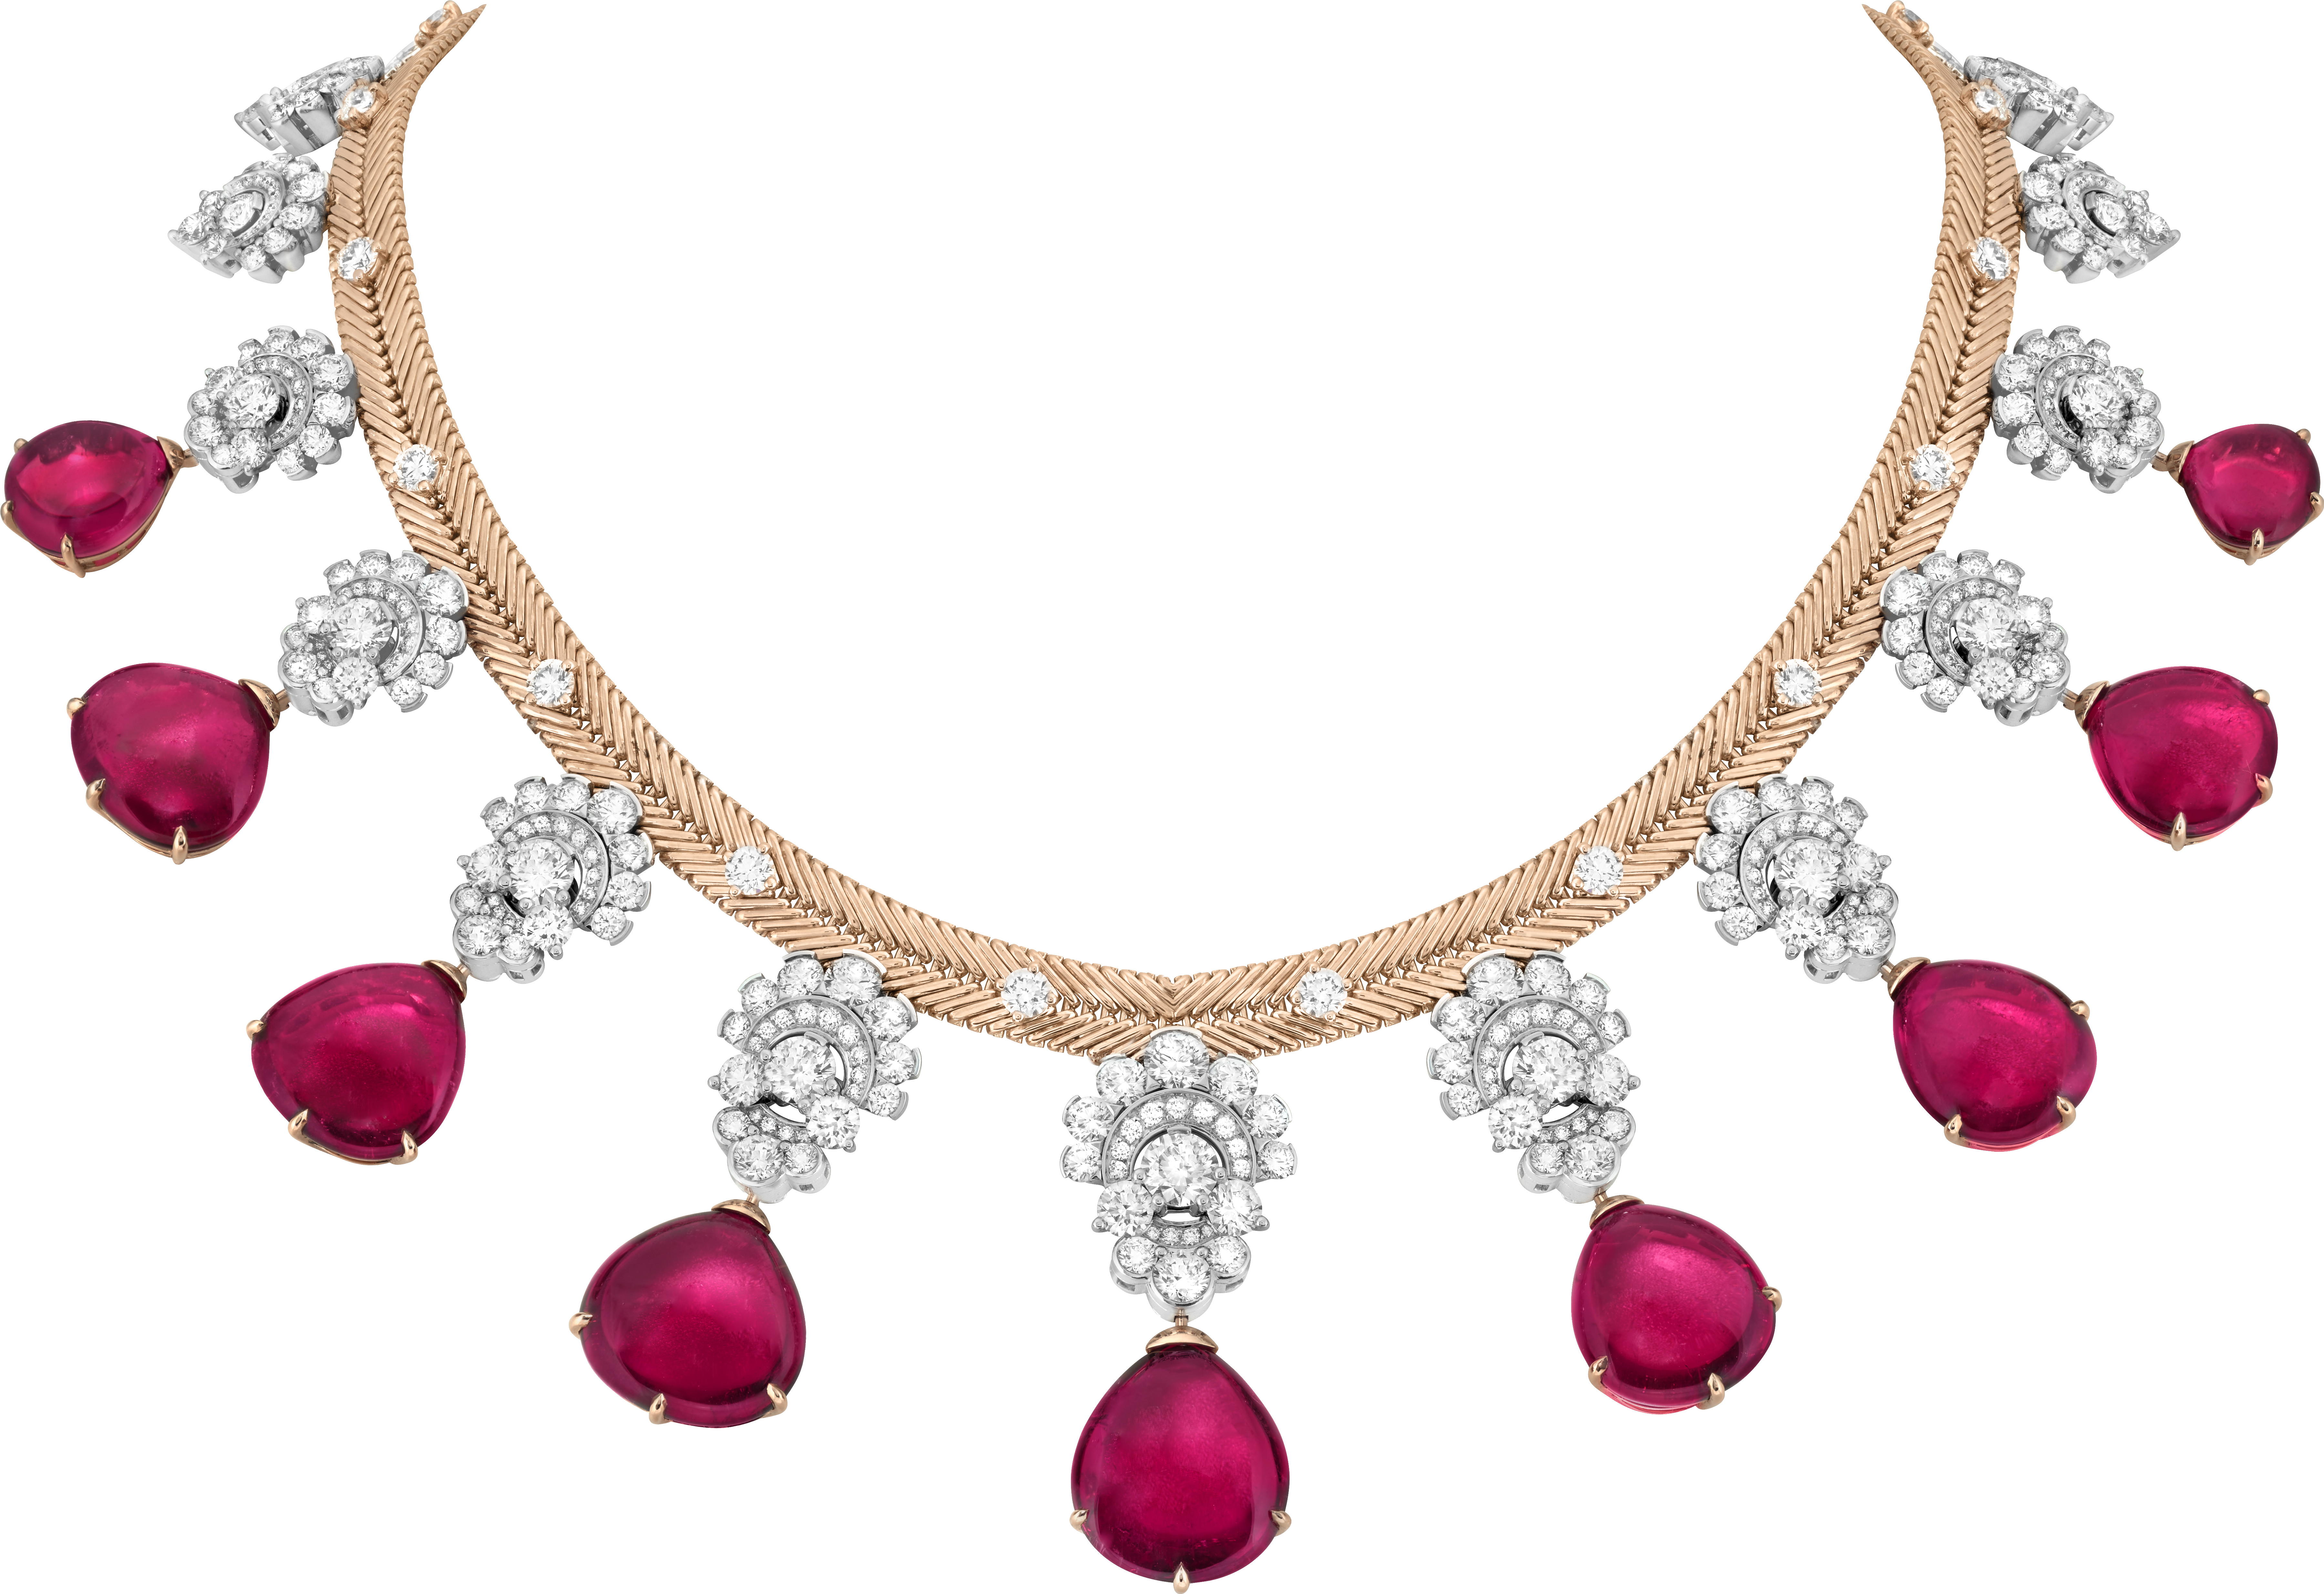 With its shape inspired by the - Van Cleef & Arpels